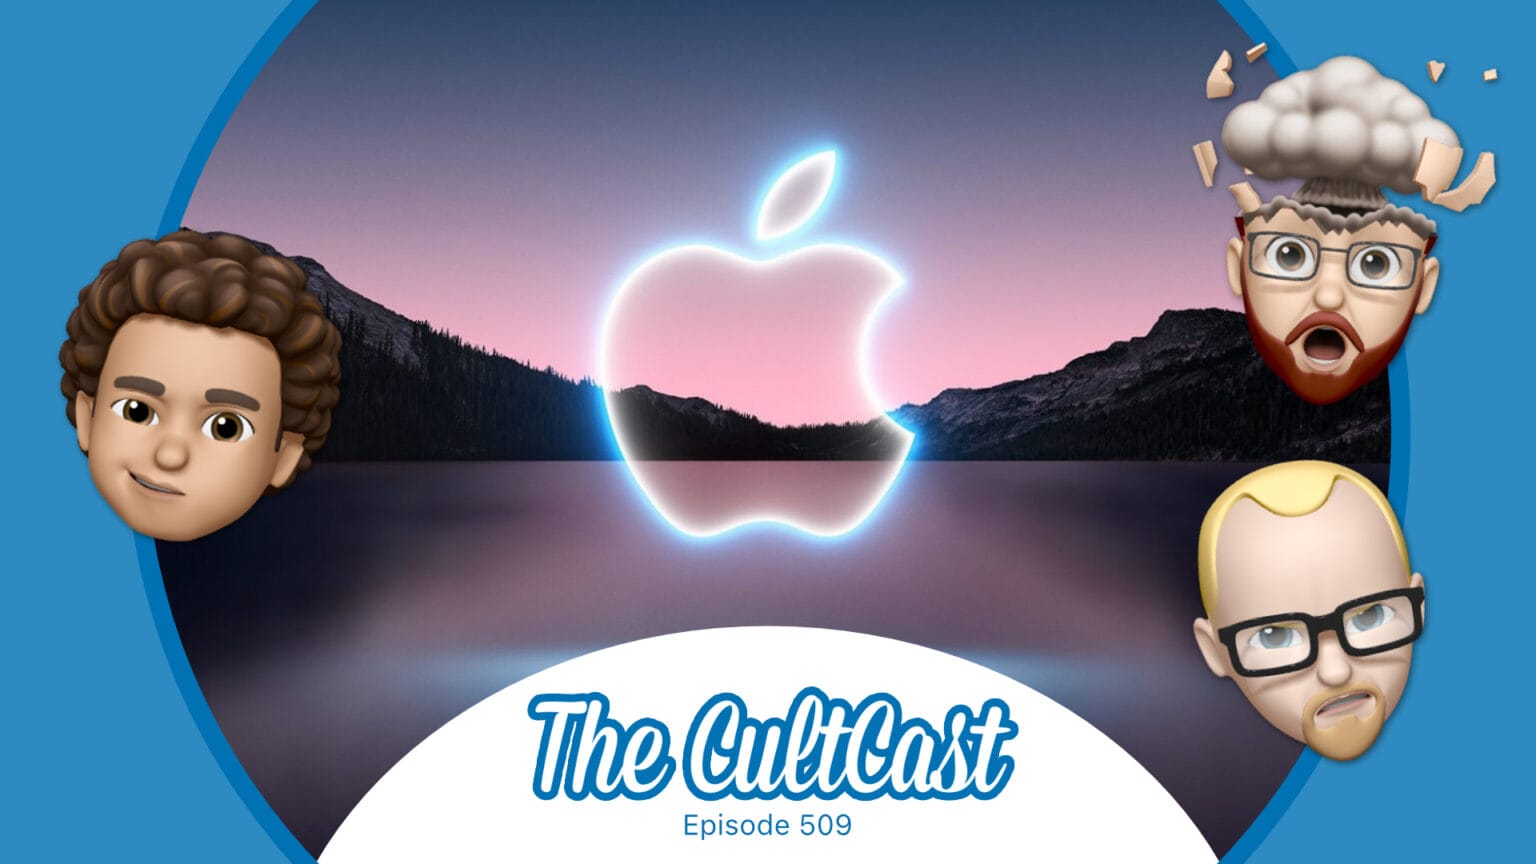 CultCast podcast episode 509: We are psyched for the California Streaming event.